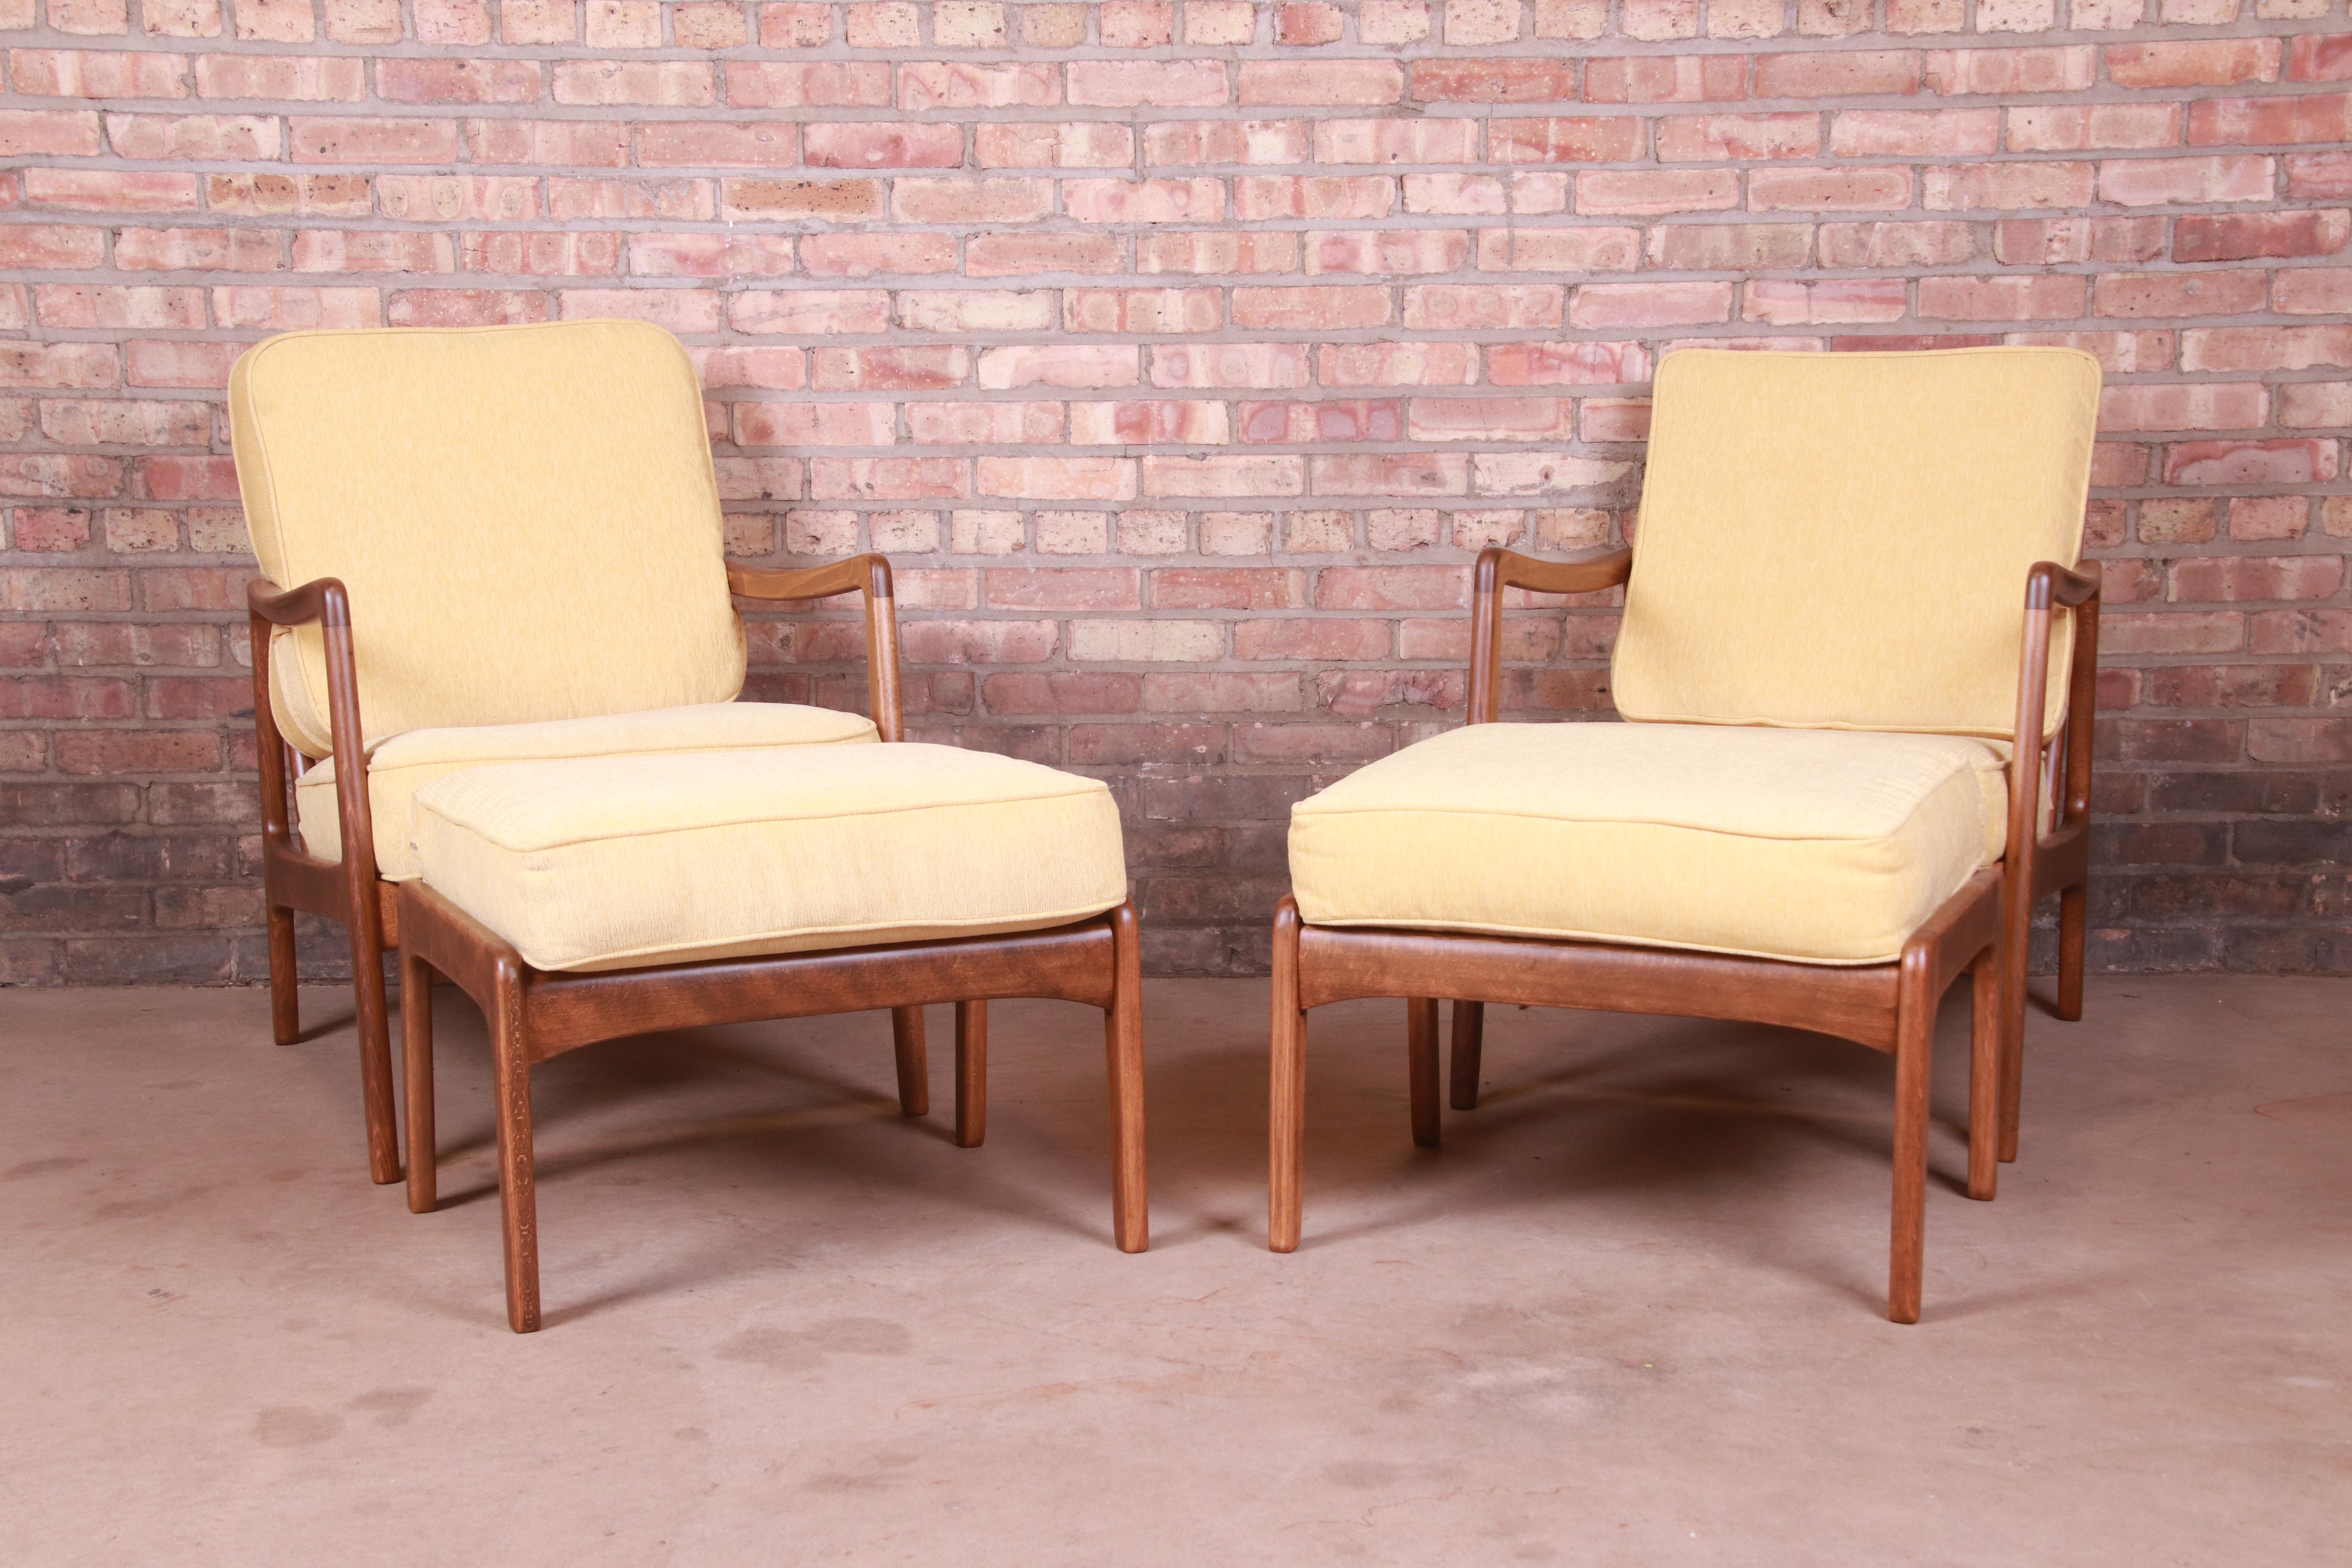 Mid-20th Century Ole Wanscher Danish Modern Lounge Chairs and Ottomans, Newly Refinished